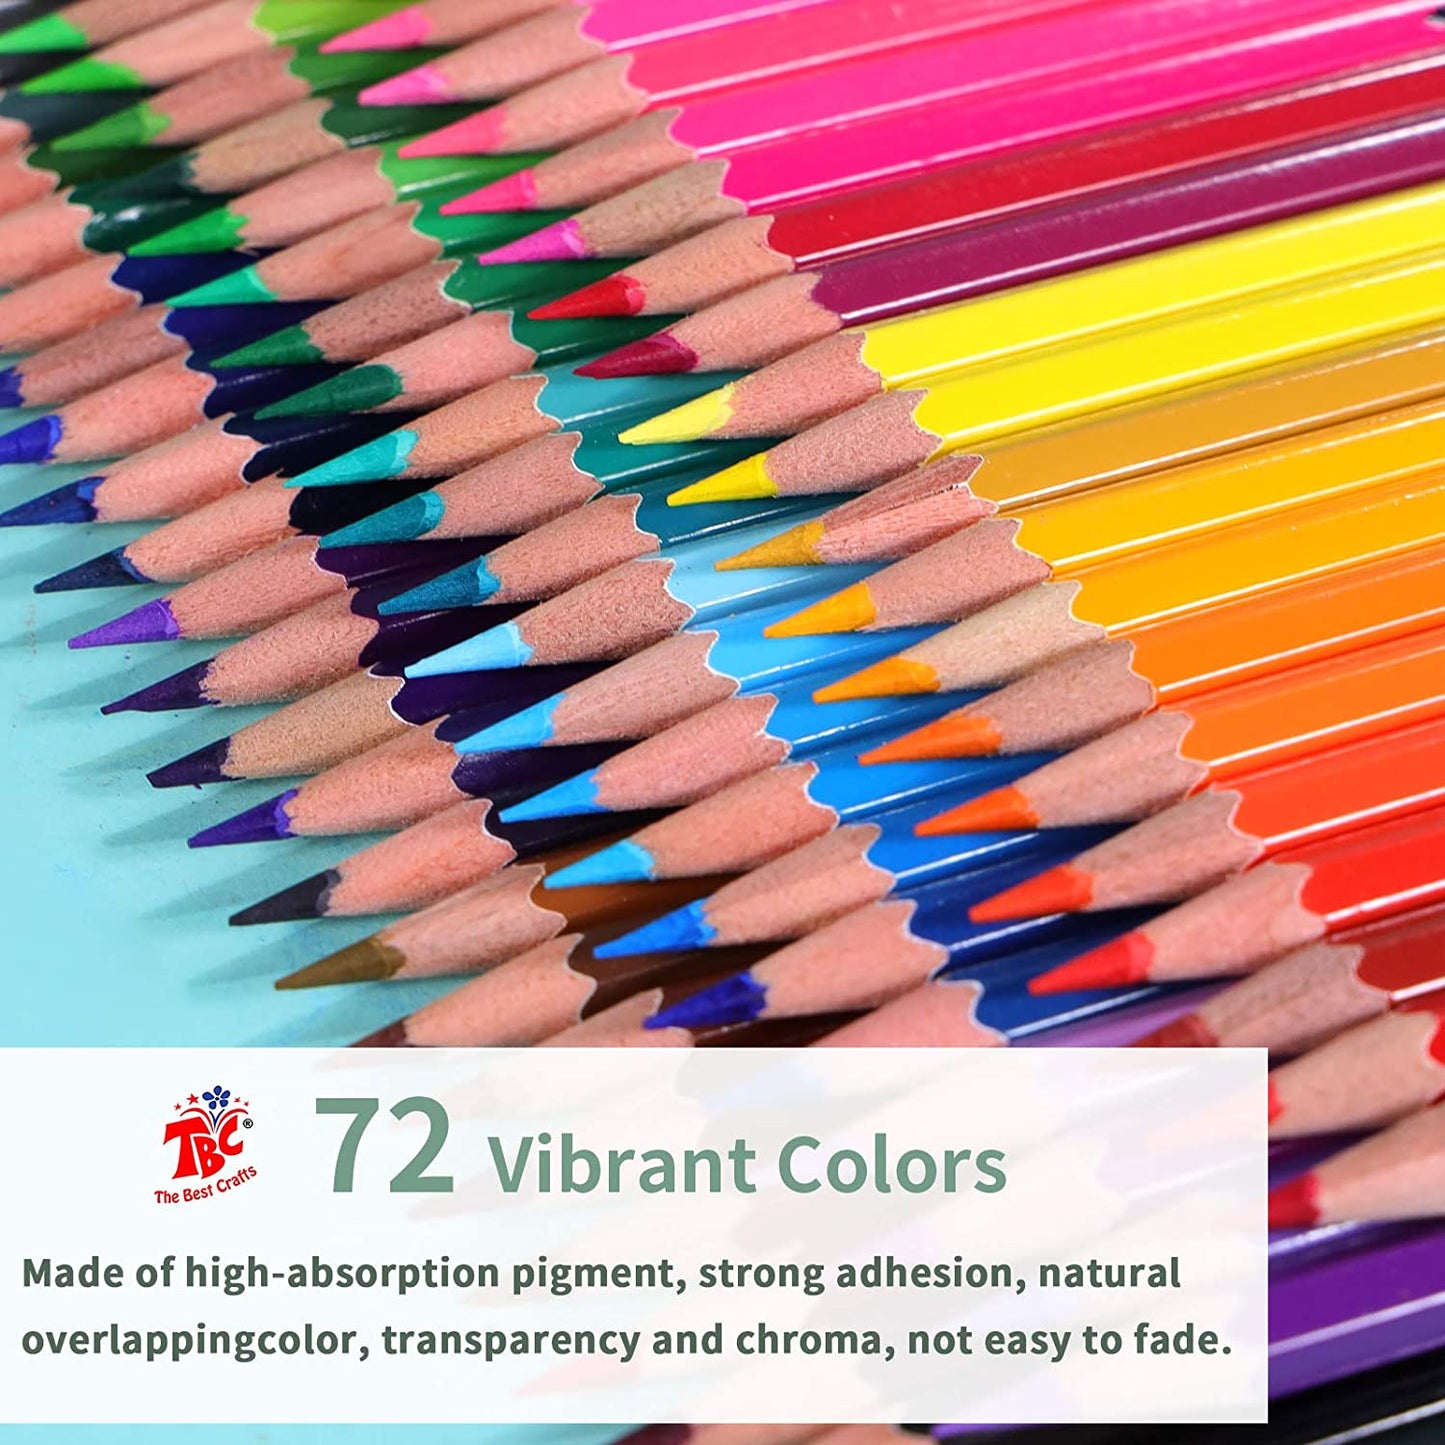 The set of 72 TBC professional watercolour pencils are made of high-absorption pigment, are vibrant colours and are not easy to fade - Stationery Island 